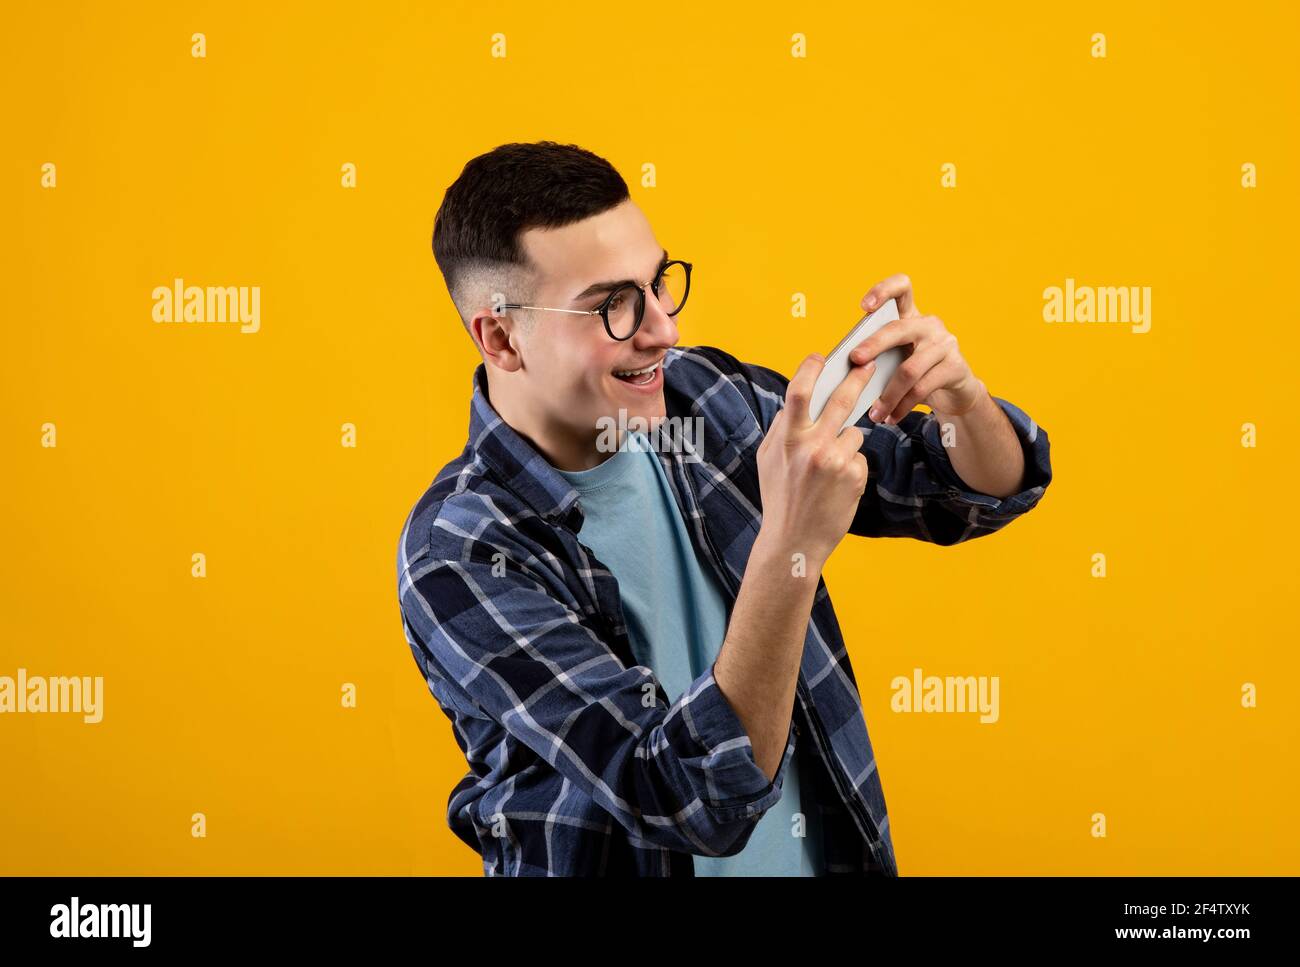 Online gaming concept. Portrait of positive young guy playing video games on smartphone over orange studio background Stock Photo